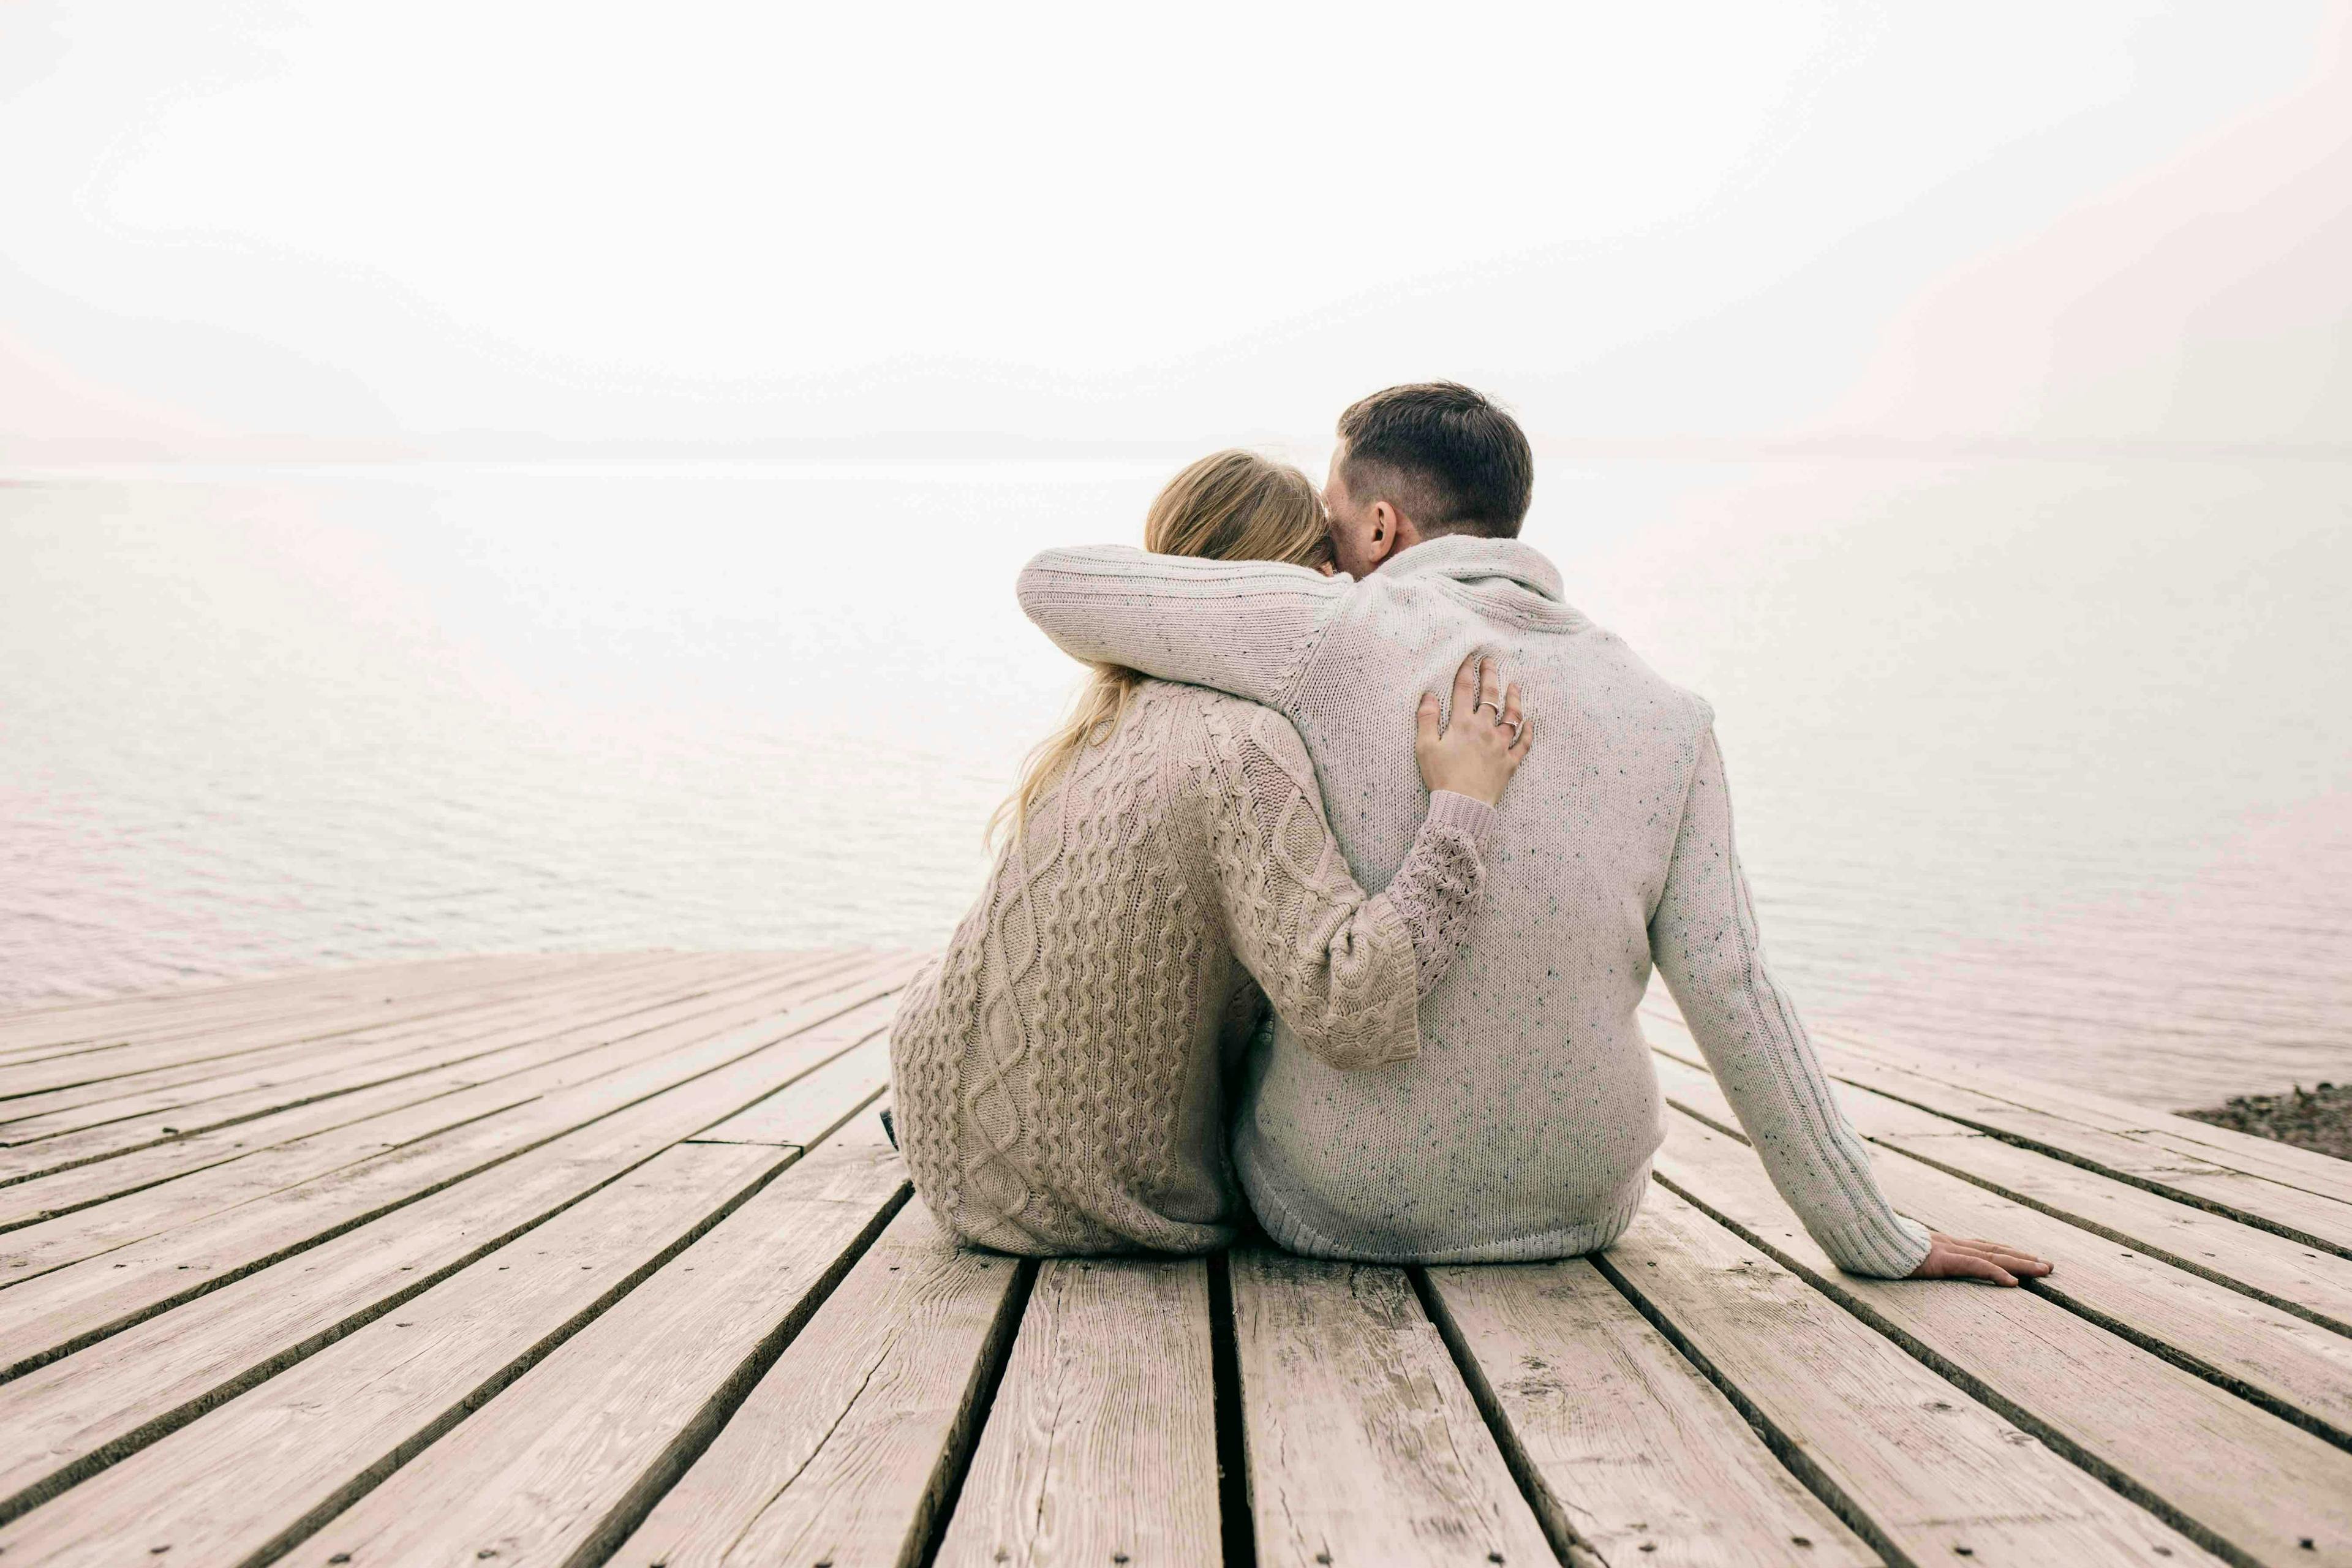 love,romance,couple,woman,young,back,enjoy,winter,blonde,beautiful,pier,view,fall,romantic,vacation,man,female,together,sit,nature,girl,people,outdoors,outside,affection,sunset,hug,family,feelings,lake,male waterfront water person